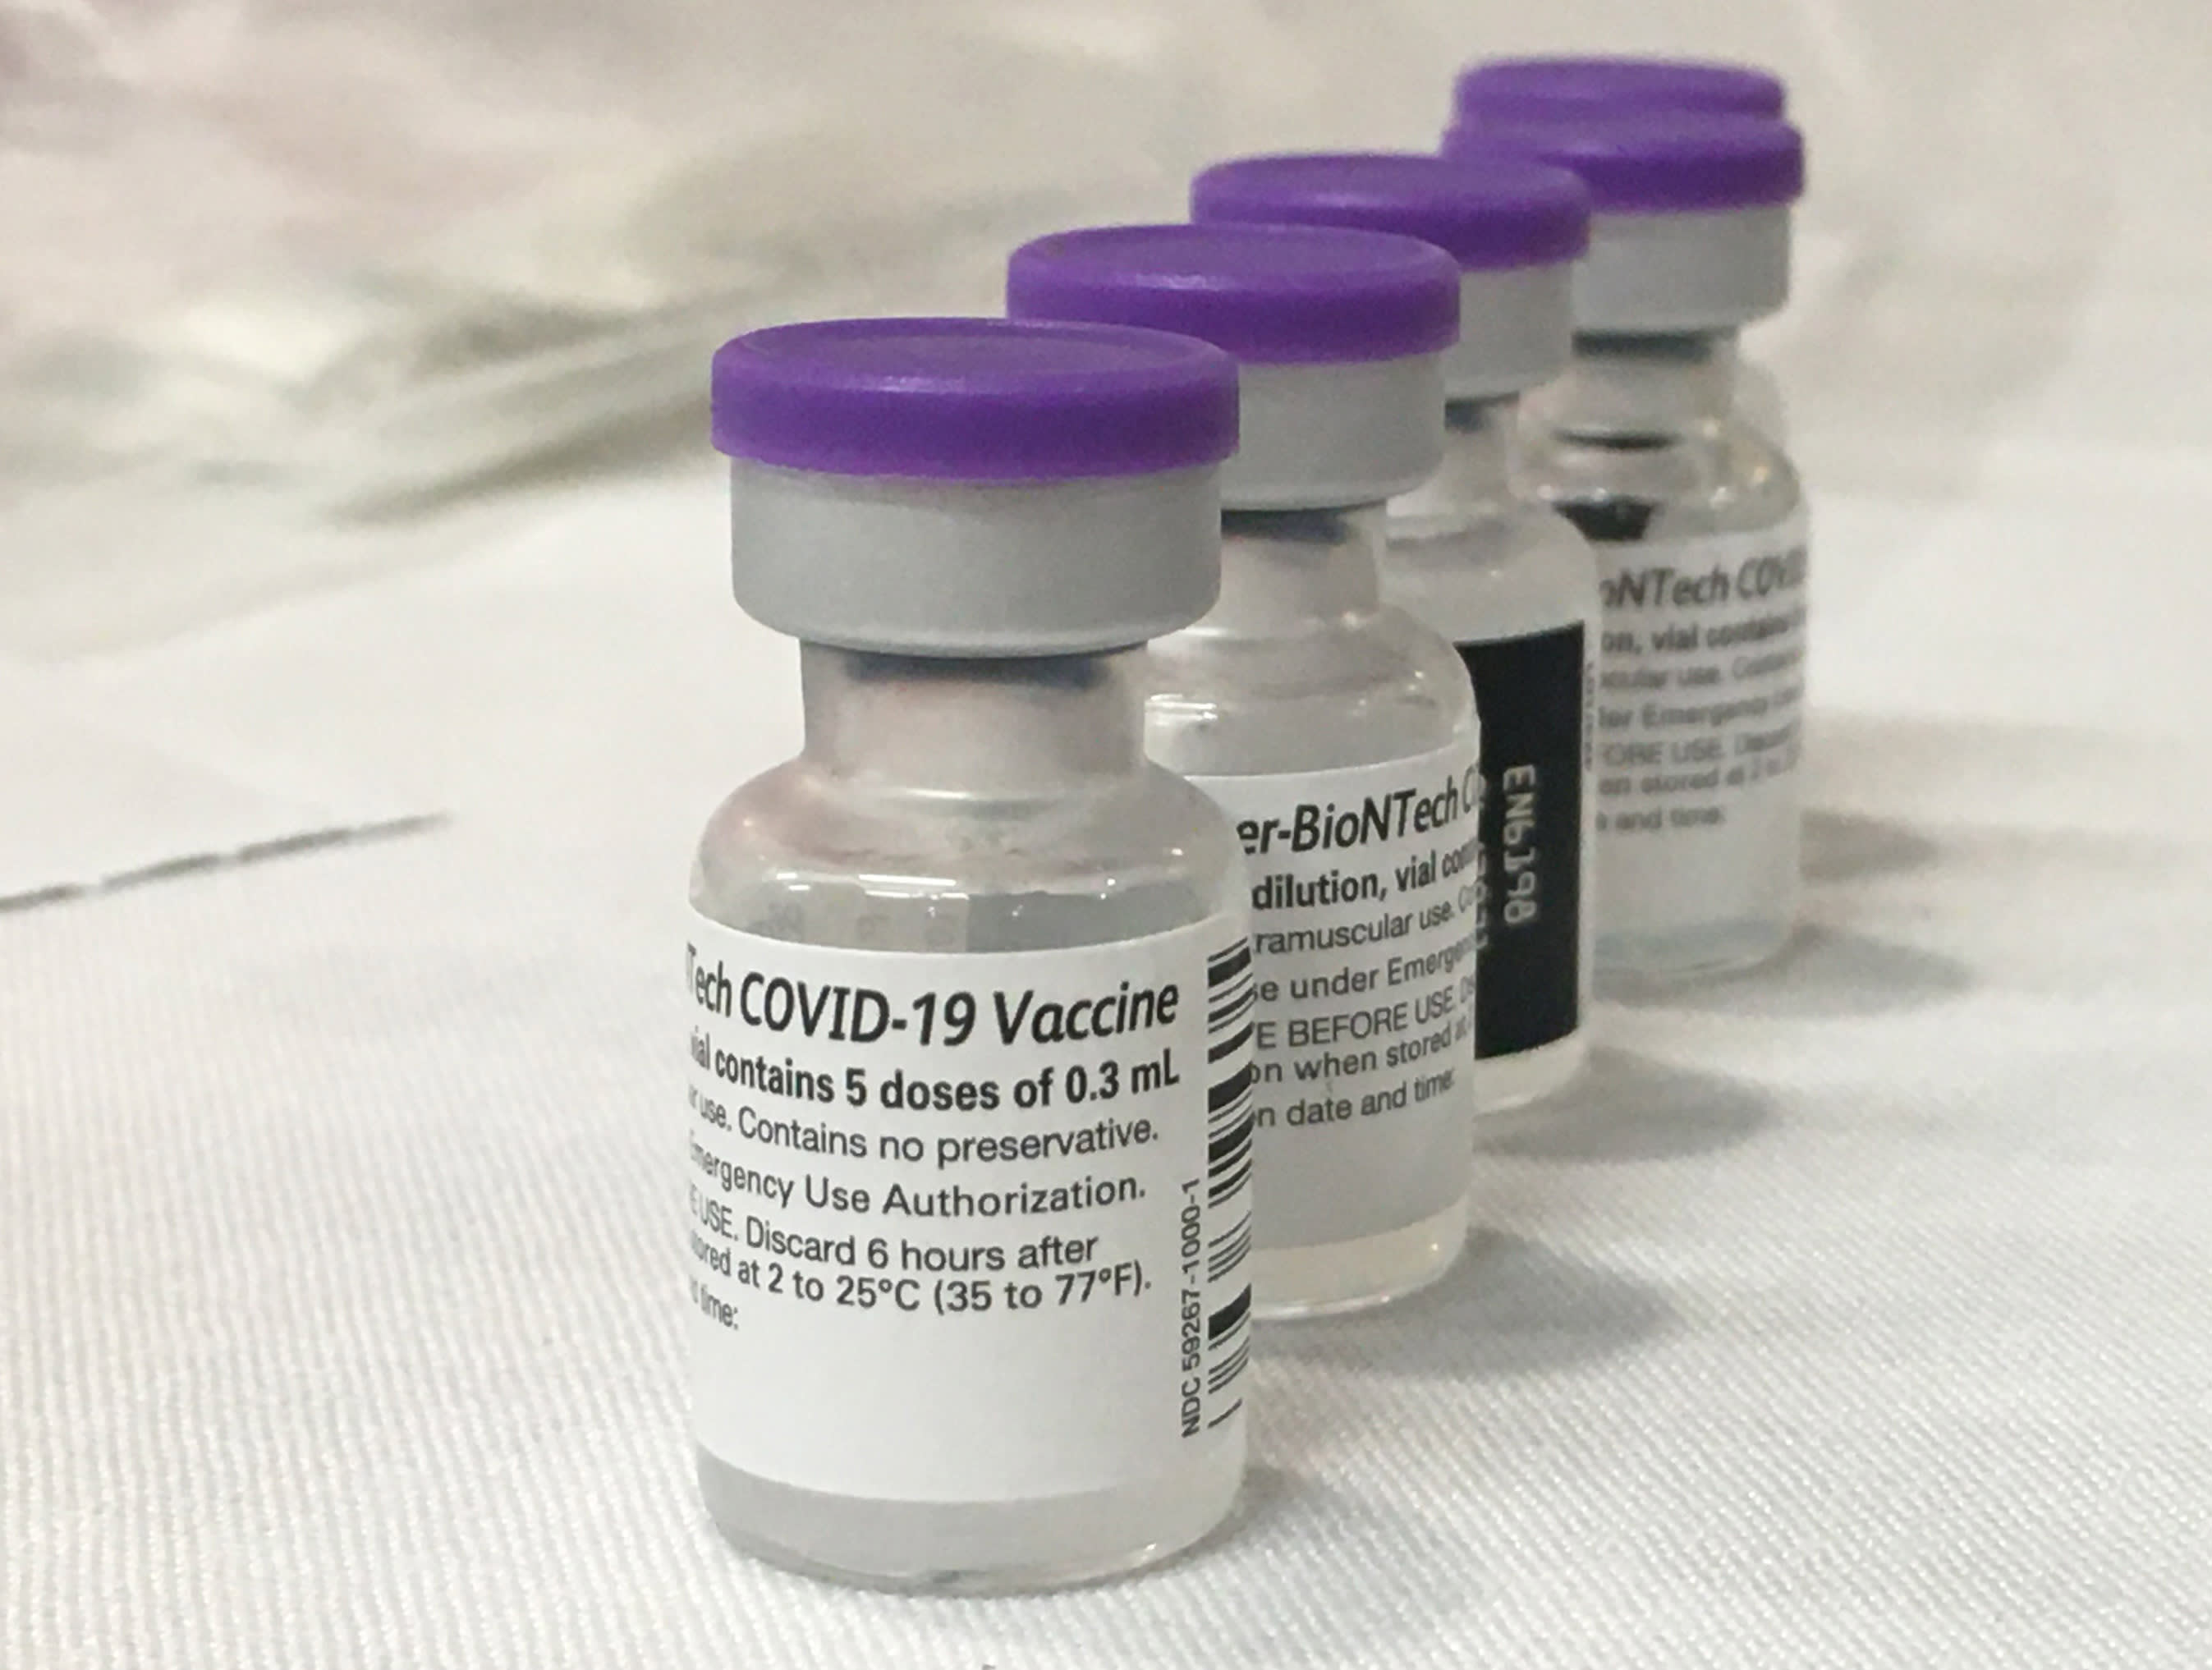 US says Russian-backed outlets are spreading Covin vaccine ‘misinformation’